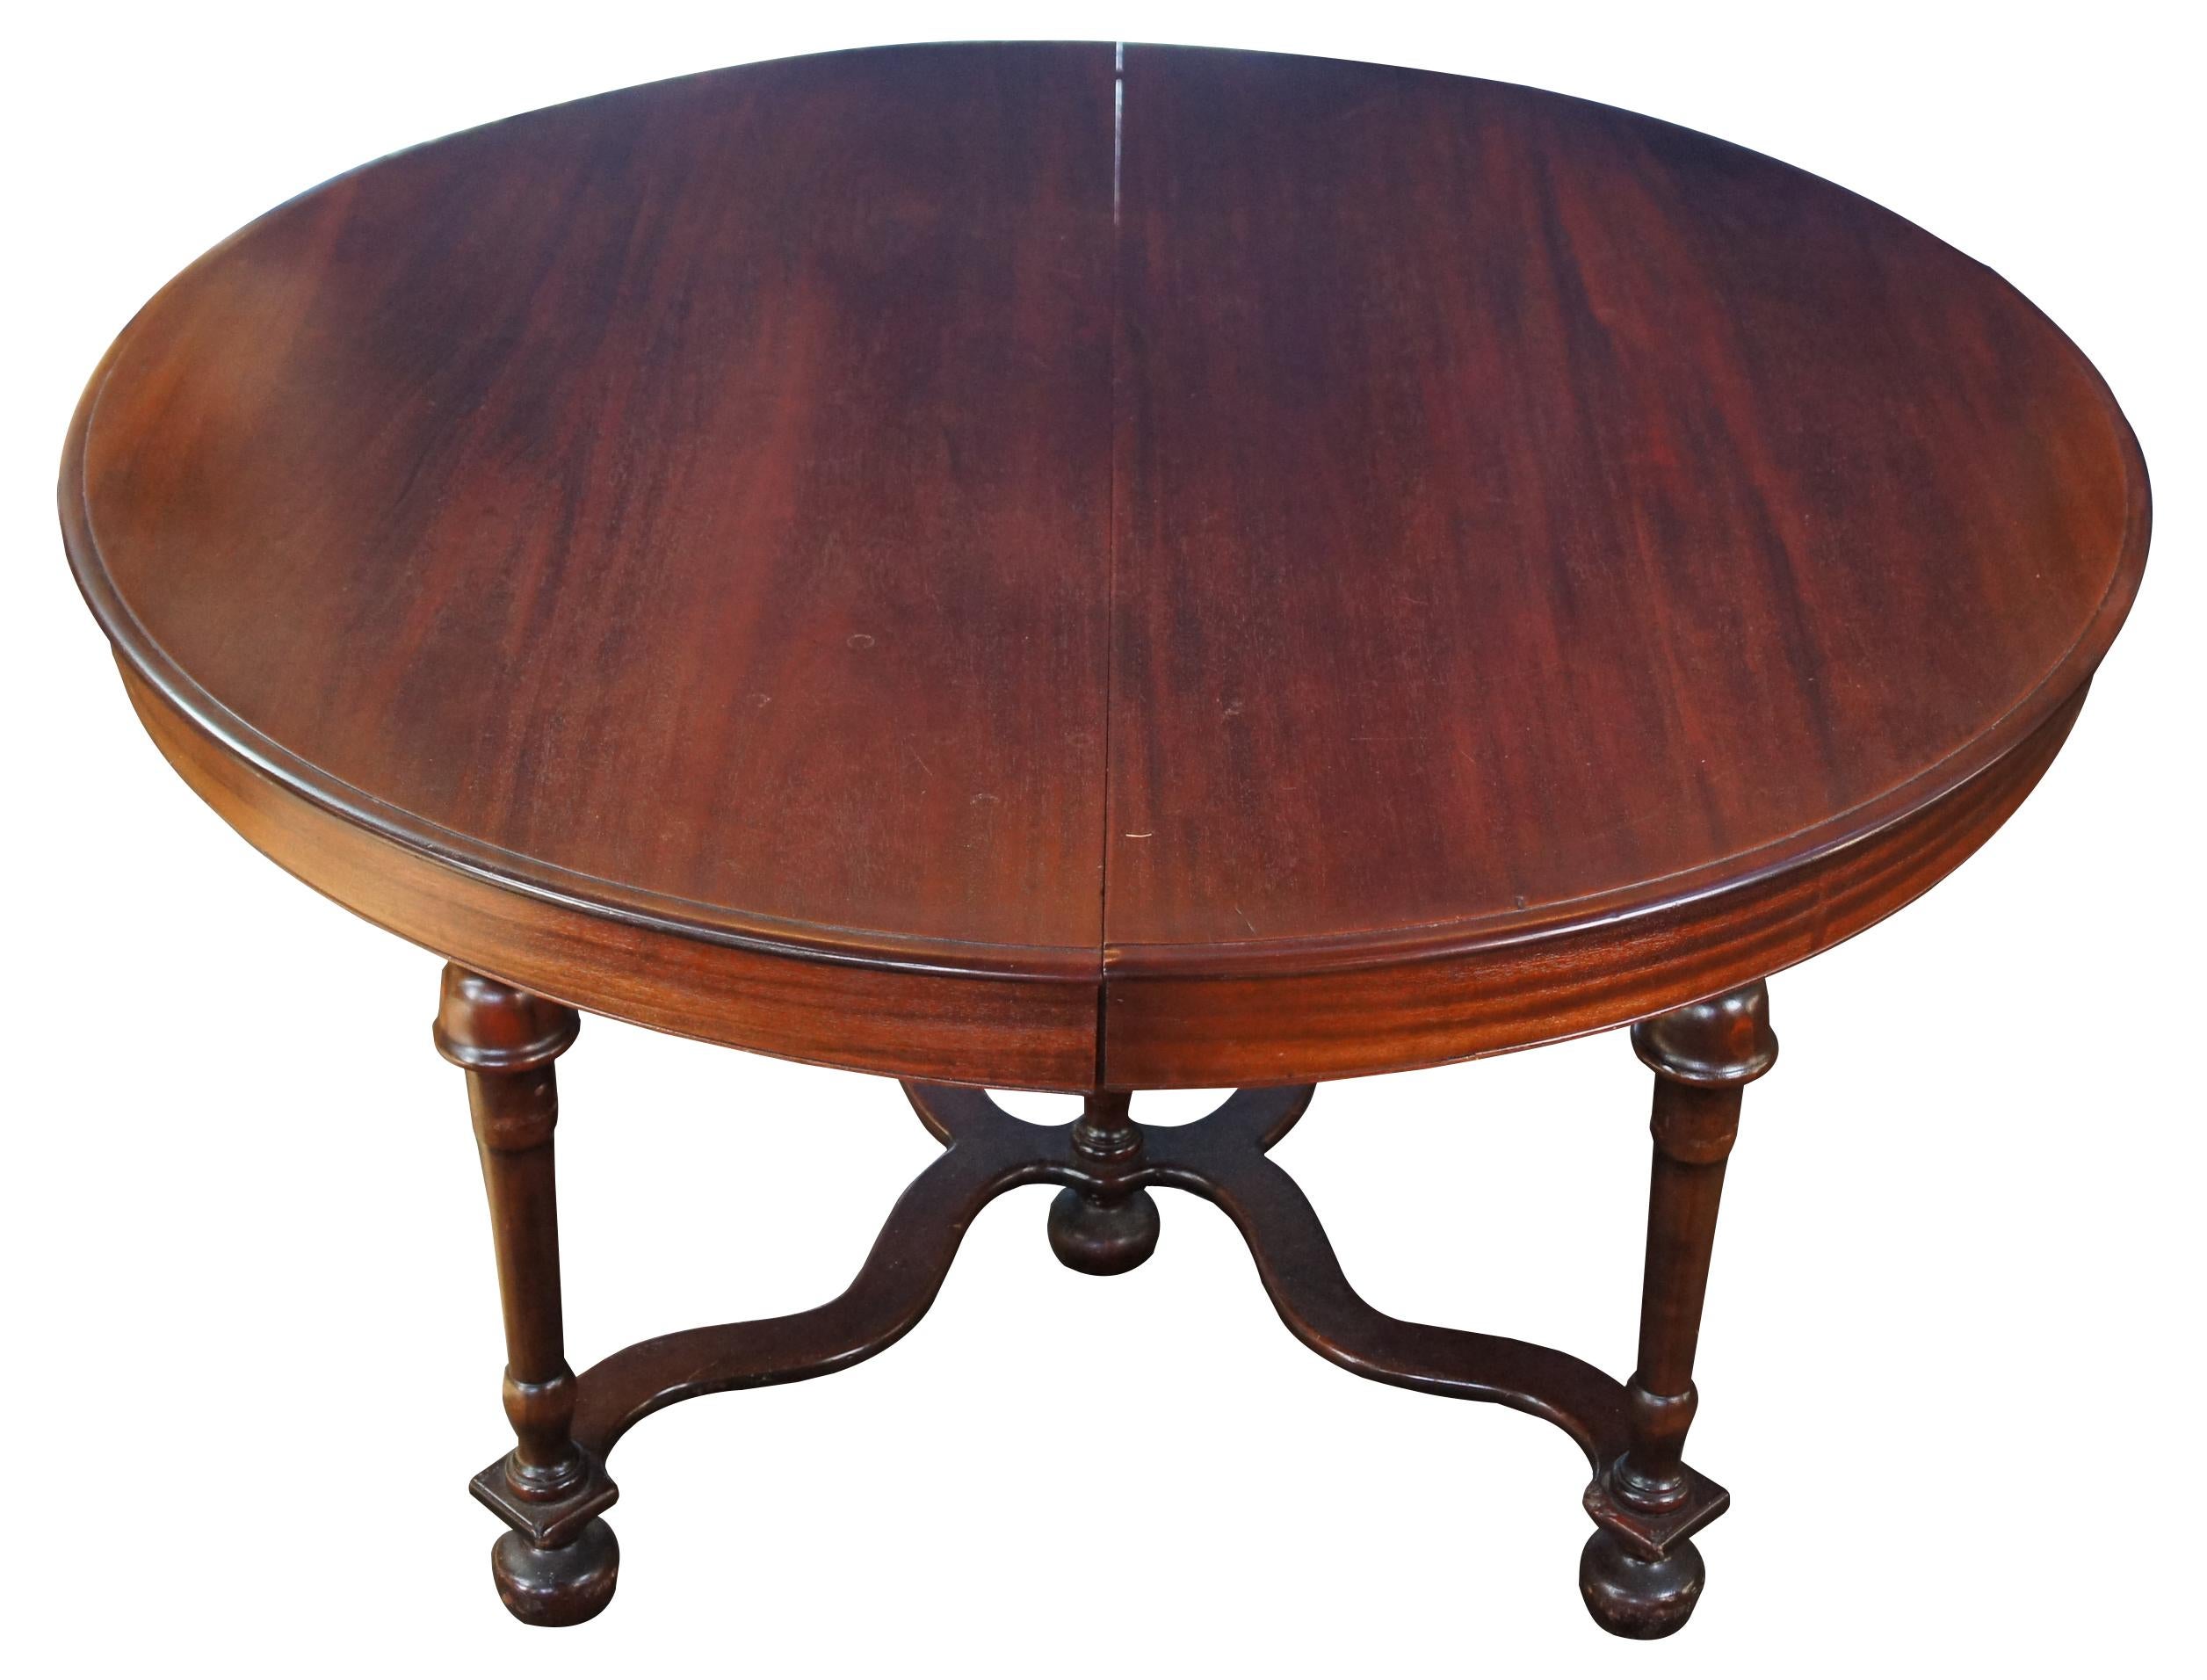 Antique Berkey & Gay Knoleworth William & Mary dining table. Made of mahogany featuring round form that extends to oval with five turned legs connected by serpentine stretchers and bun feet.. The William and Mary style was a transitional style